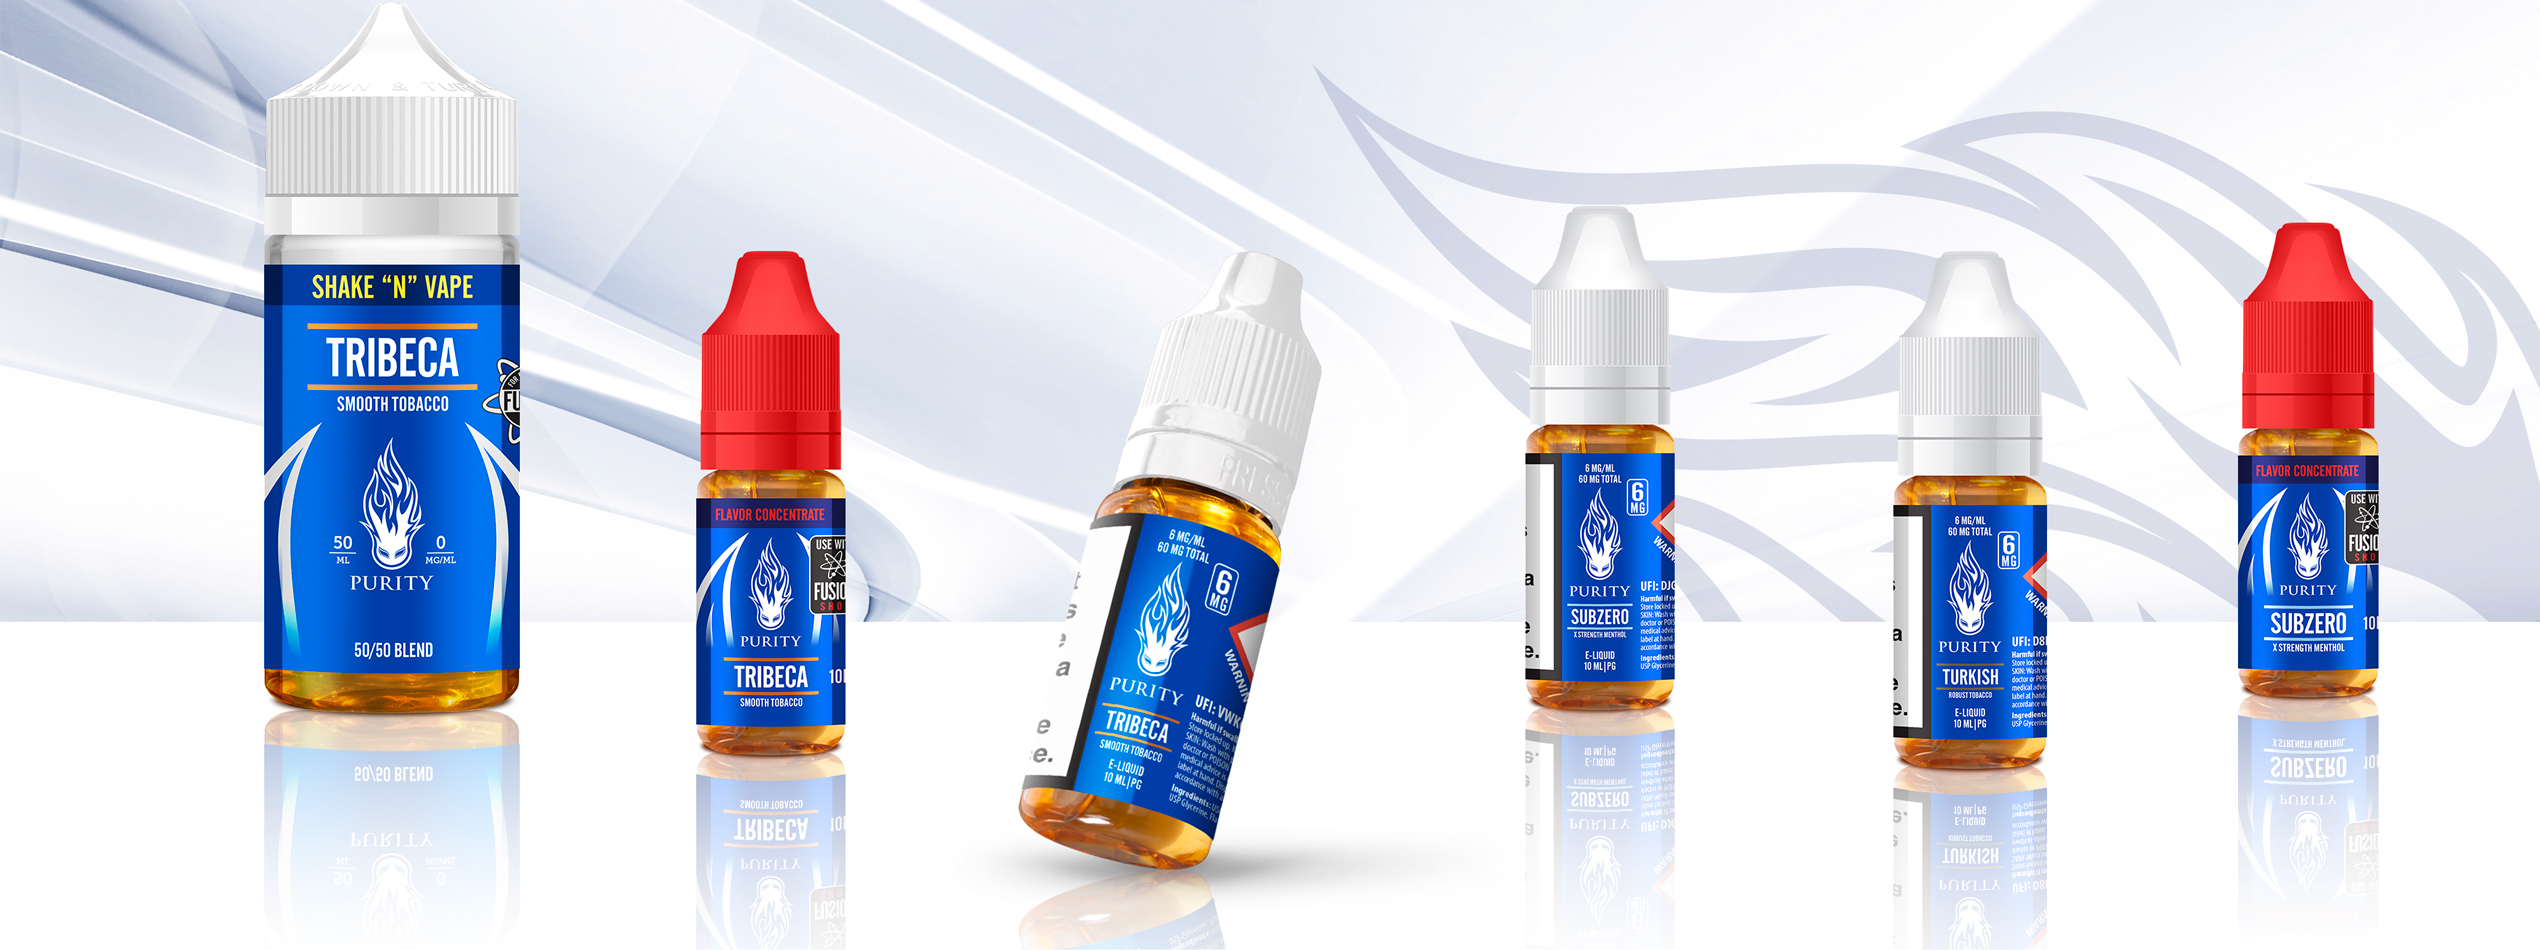 Purity Home Page - E-liquid Product Bottles